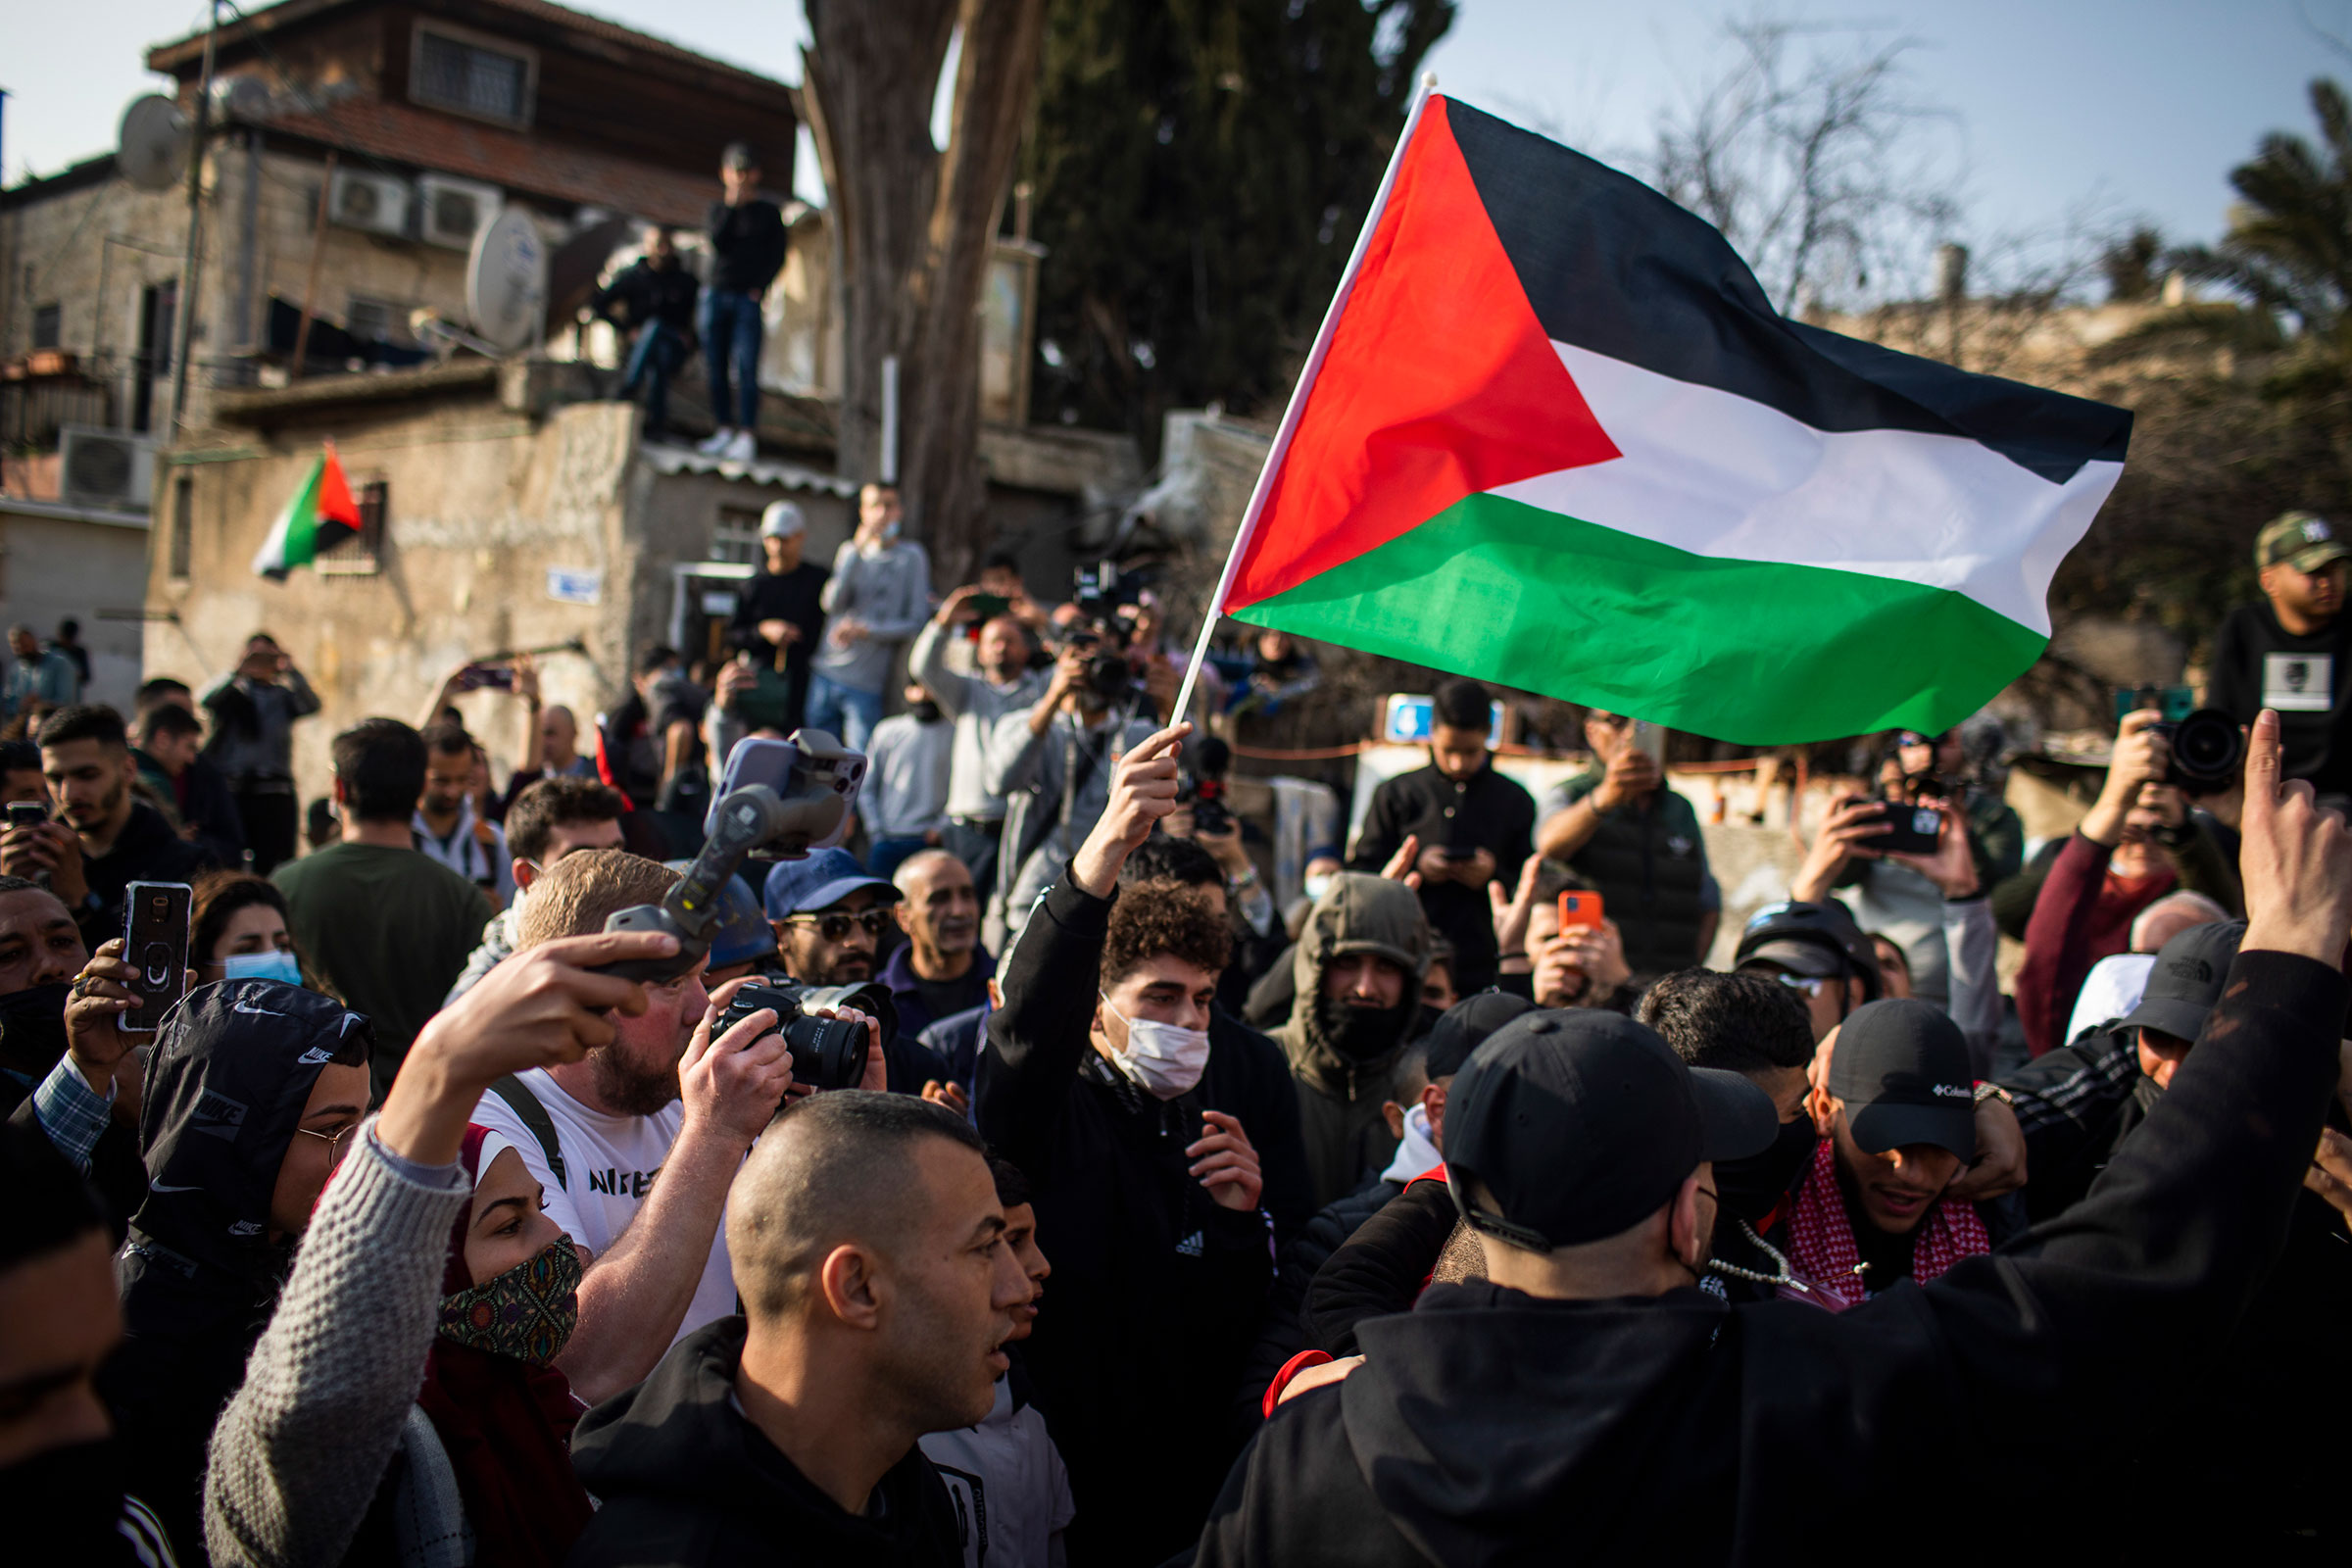 Palestinian and Israeli activists take part in a weekly protest in the East Jerusalem neighborhood of Sheikh Jarrah, against the eviction of Palestinian families in favor of Jewish settlers, on Feb. 18, 2022. (Ilia Yefimovich—picture alliance/Getty Images)